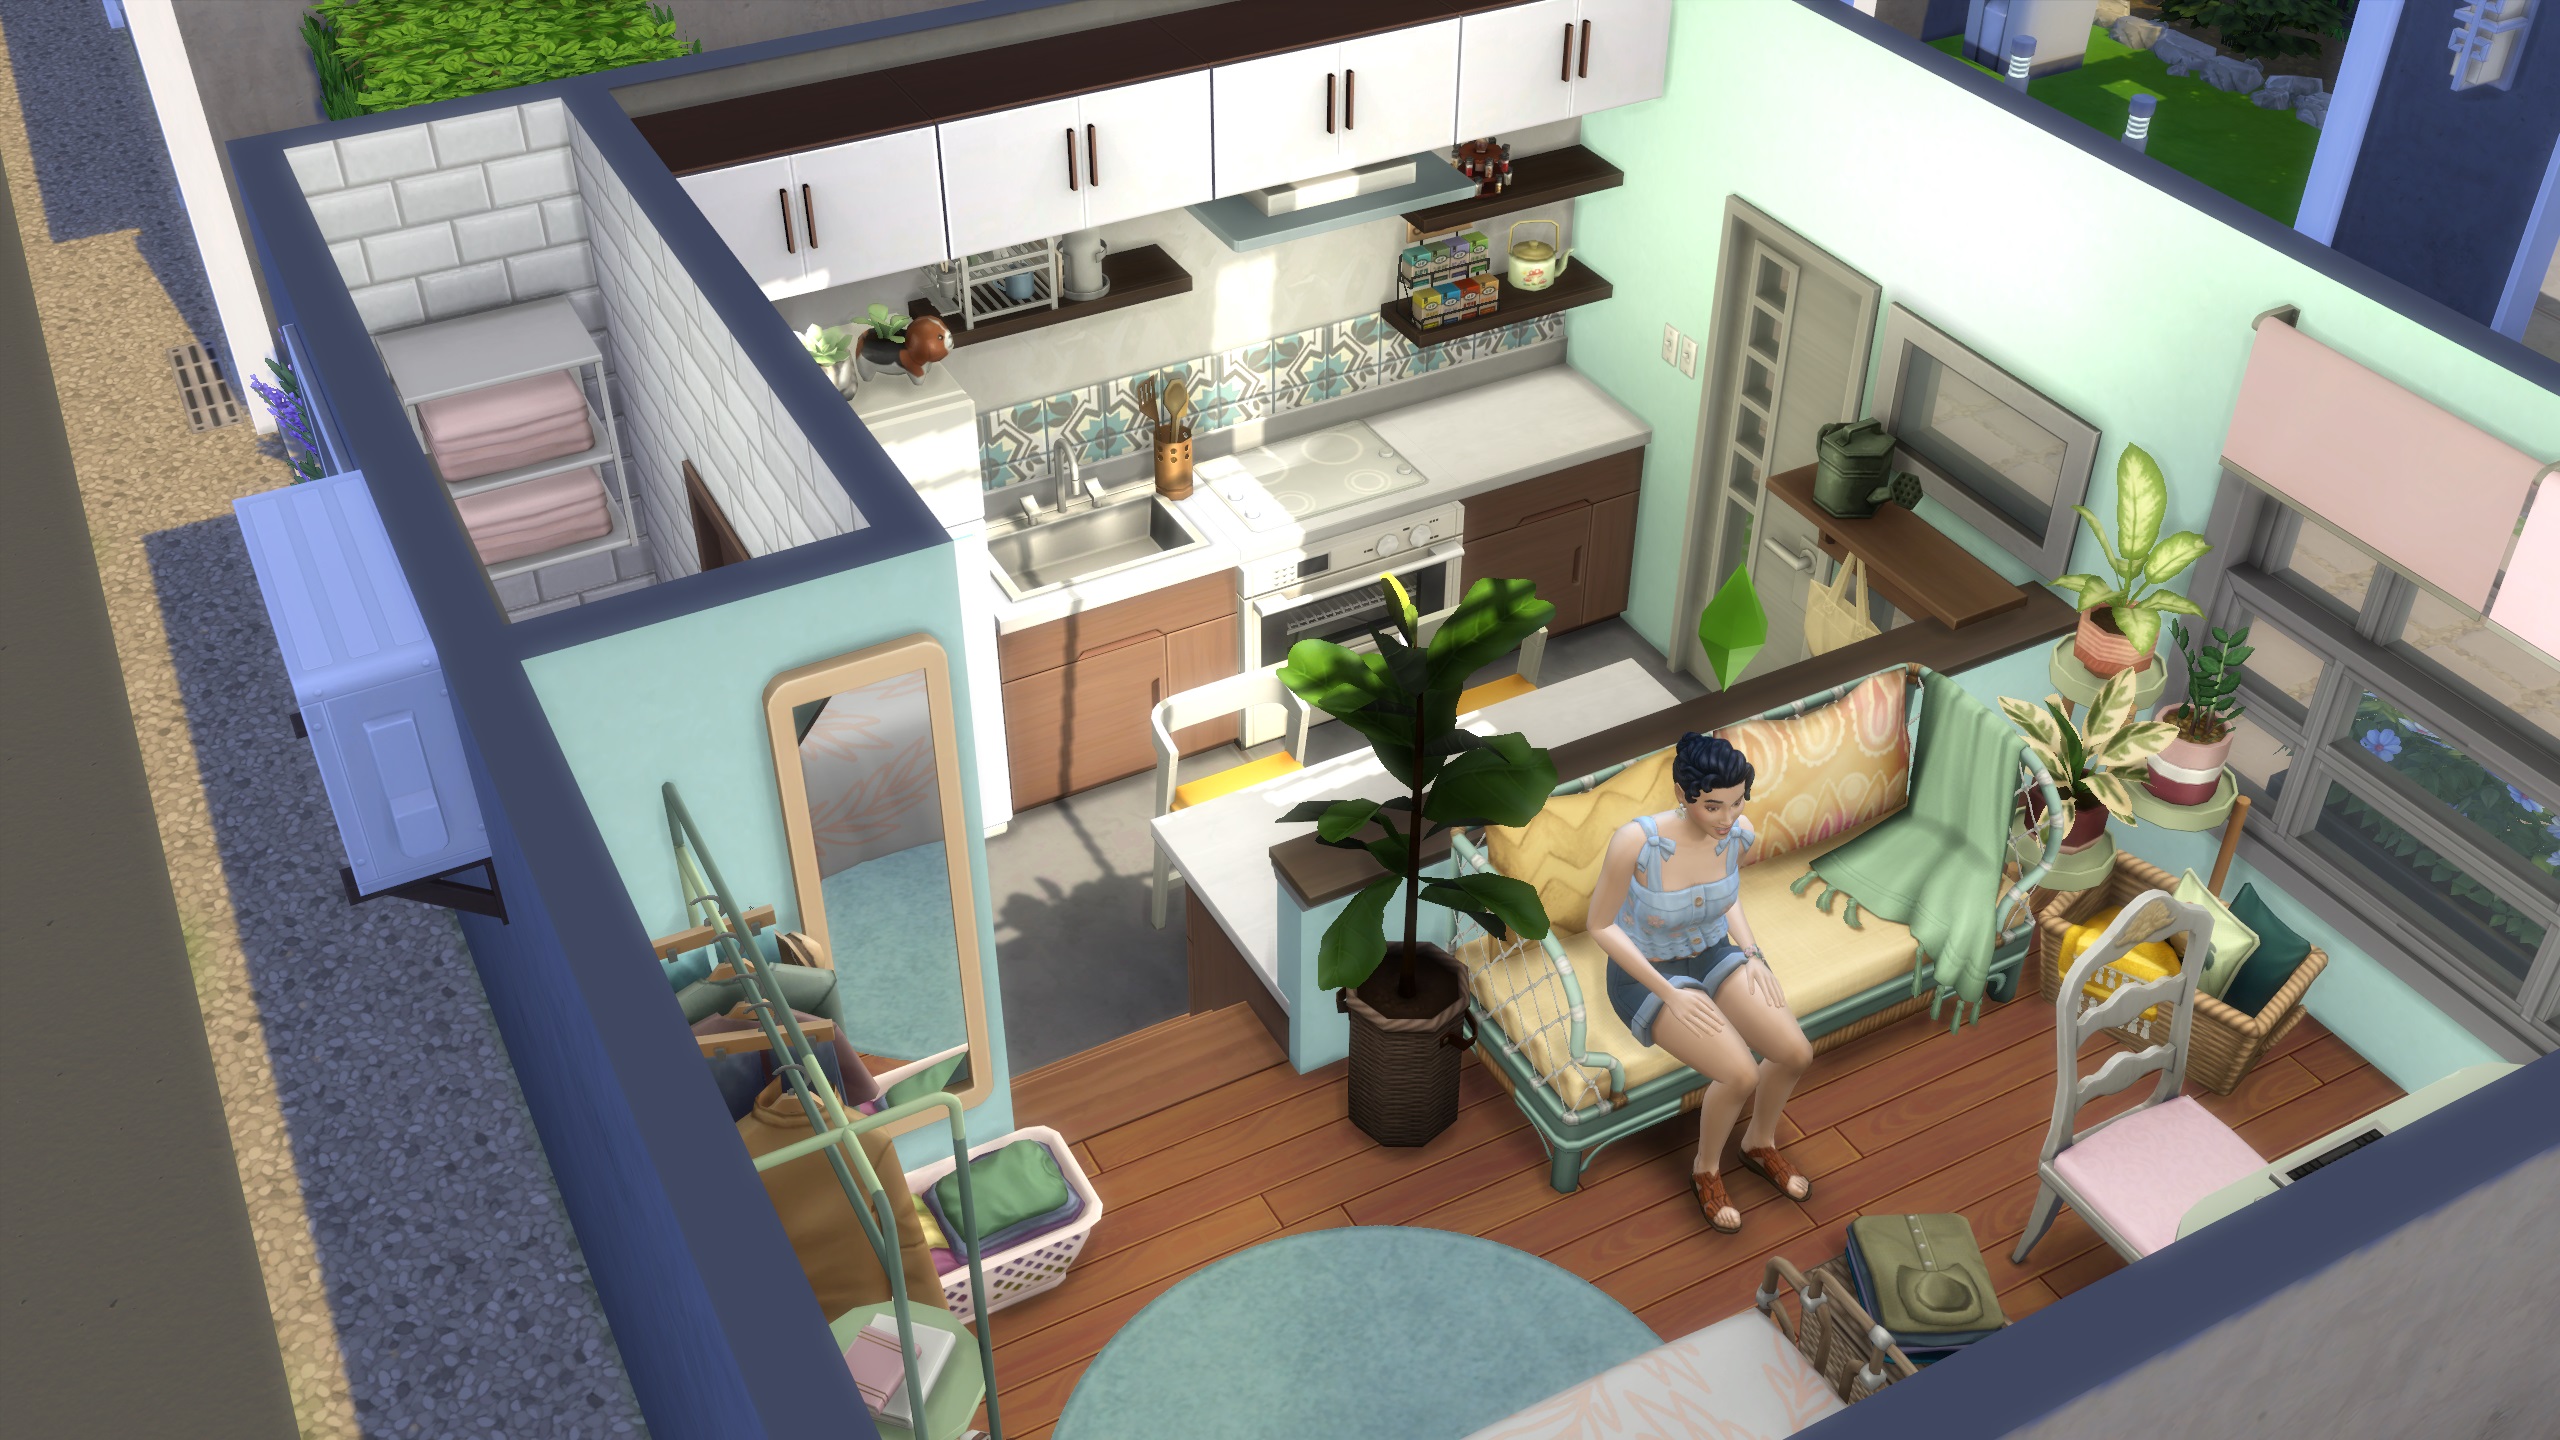 The Sims 4 build tips - A Sim in a very smal loft apartment with cozy, clutttered decor.